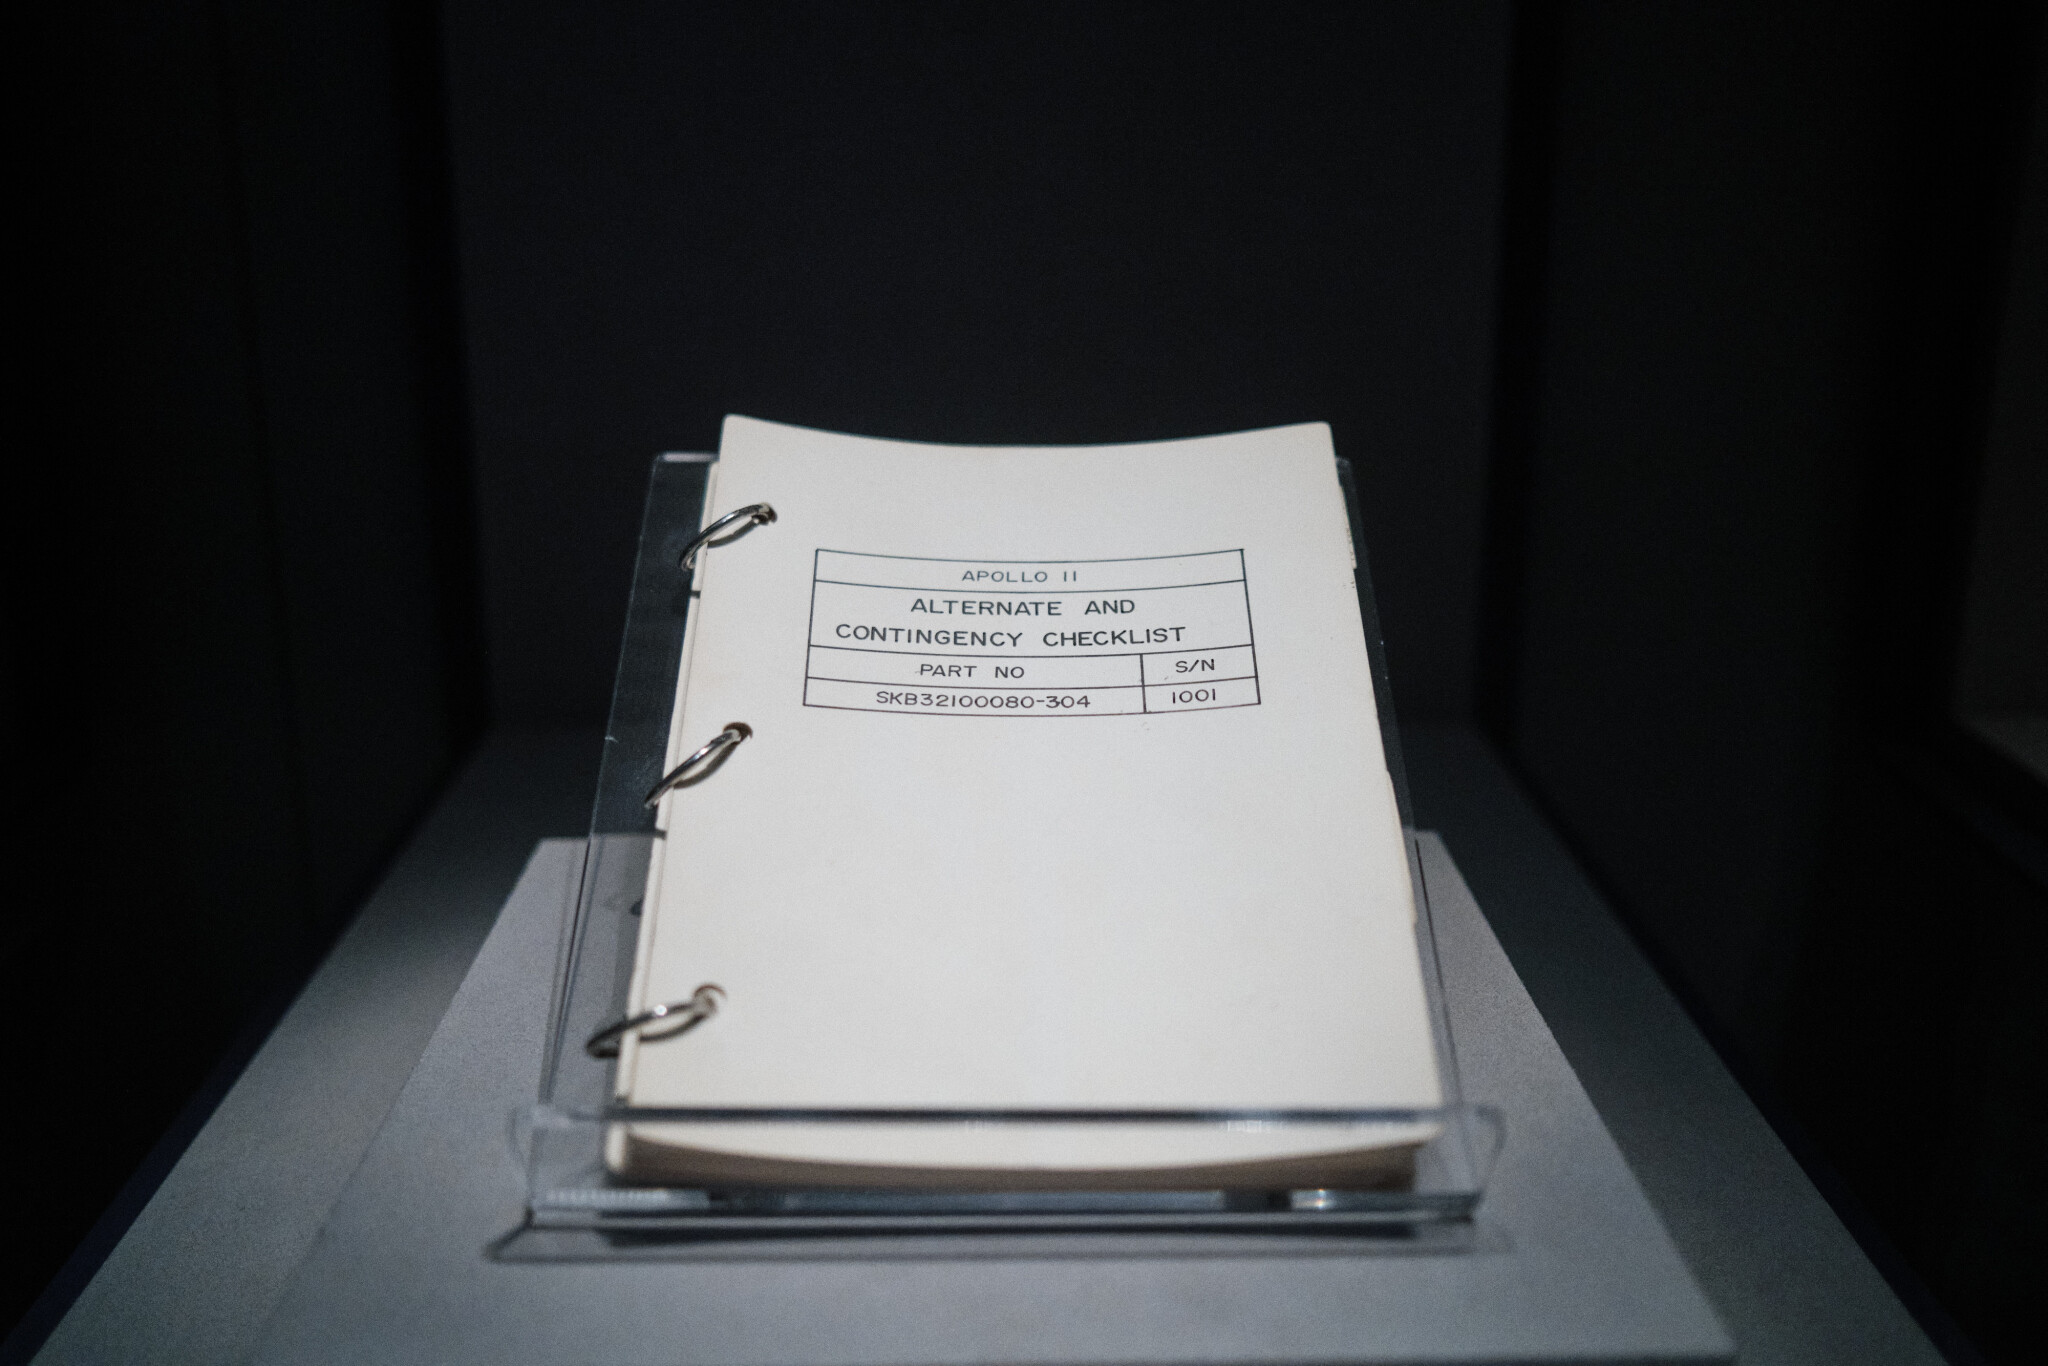 Checlist, Alternate and Contingency, Apollo 11 (SKB32100080-304)